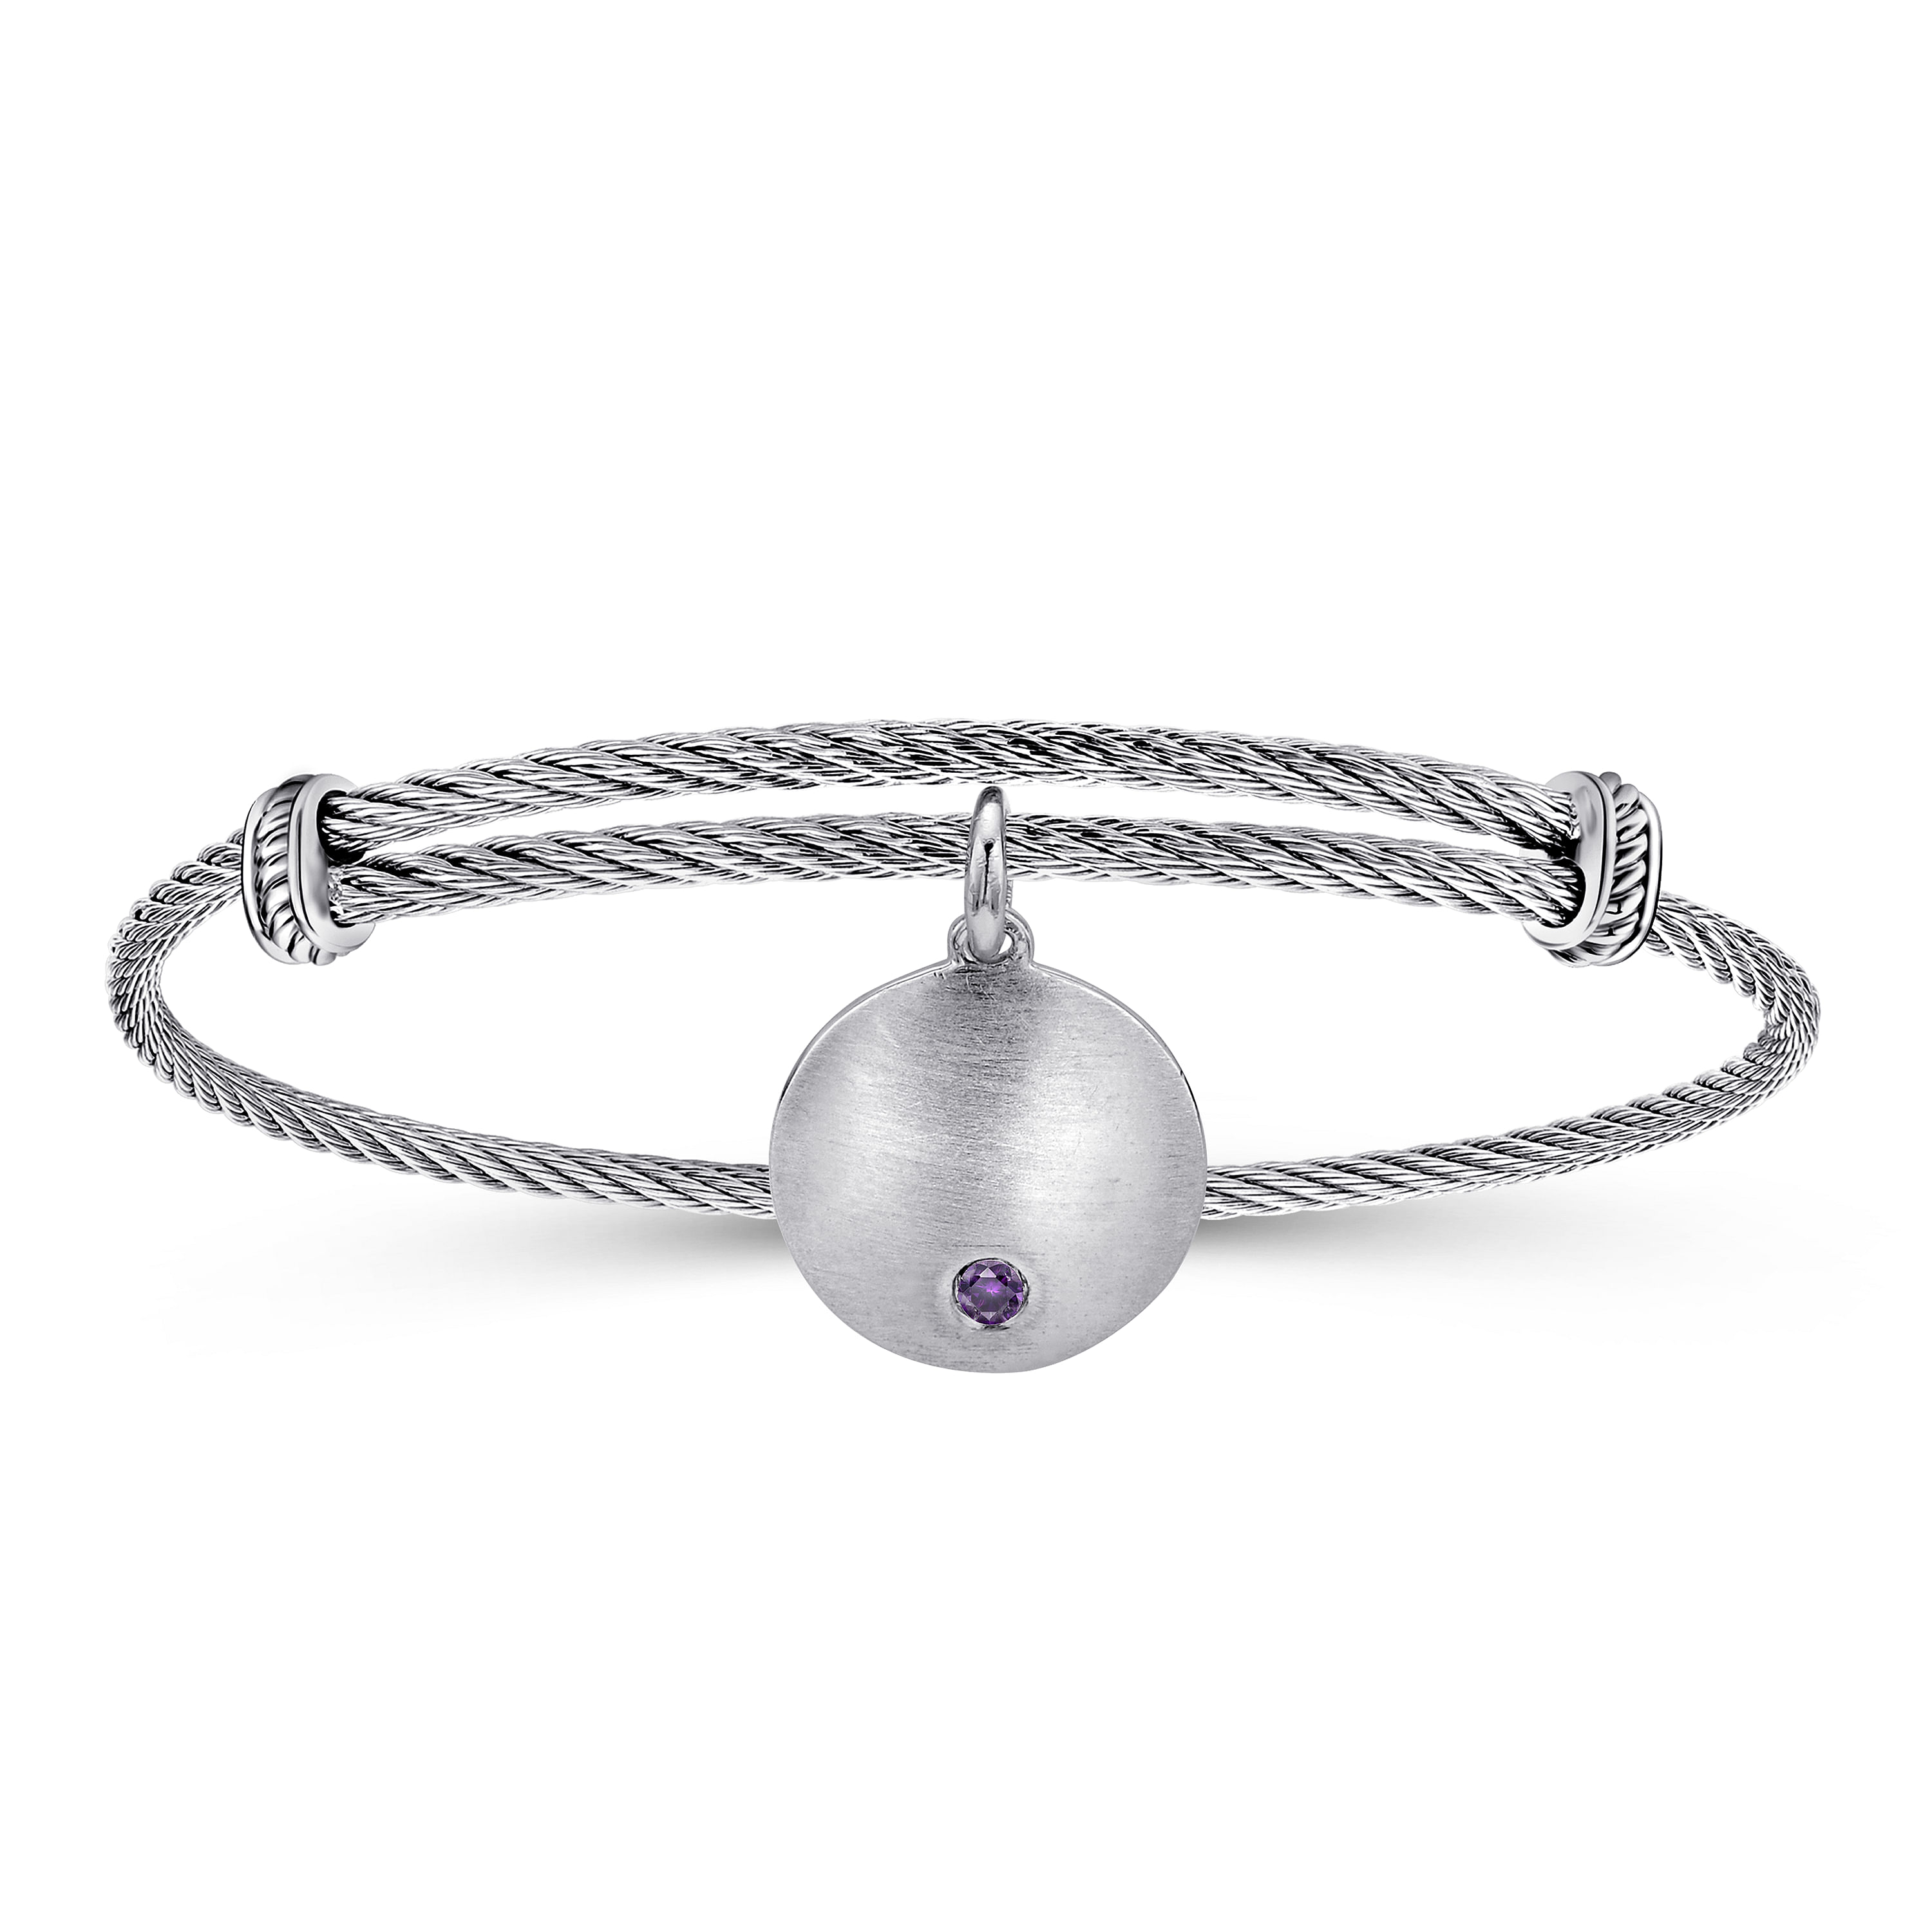 Adjustable Stainless Steel Bangle with Round Sterling Silver Amethyst Stone Disc Charm